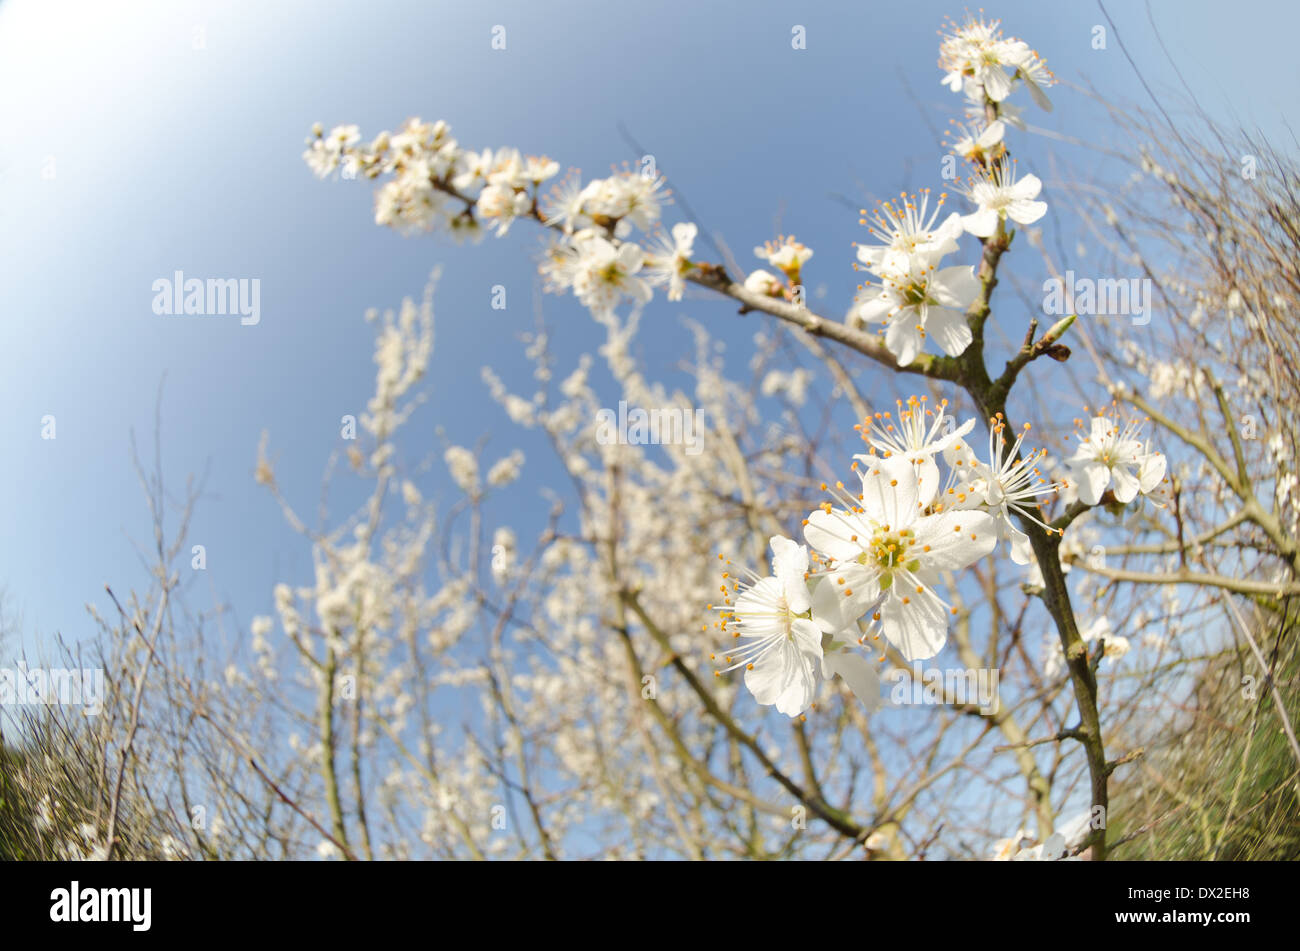 Detail of wild damson plumb blossom flowering in March the start of Spring Time on a divided branch with a blue sky Stock Photo